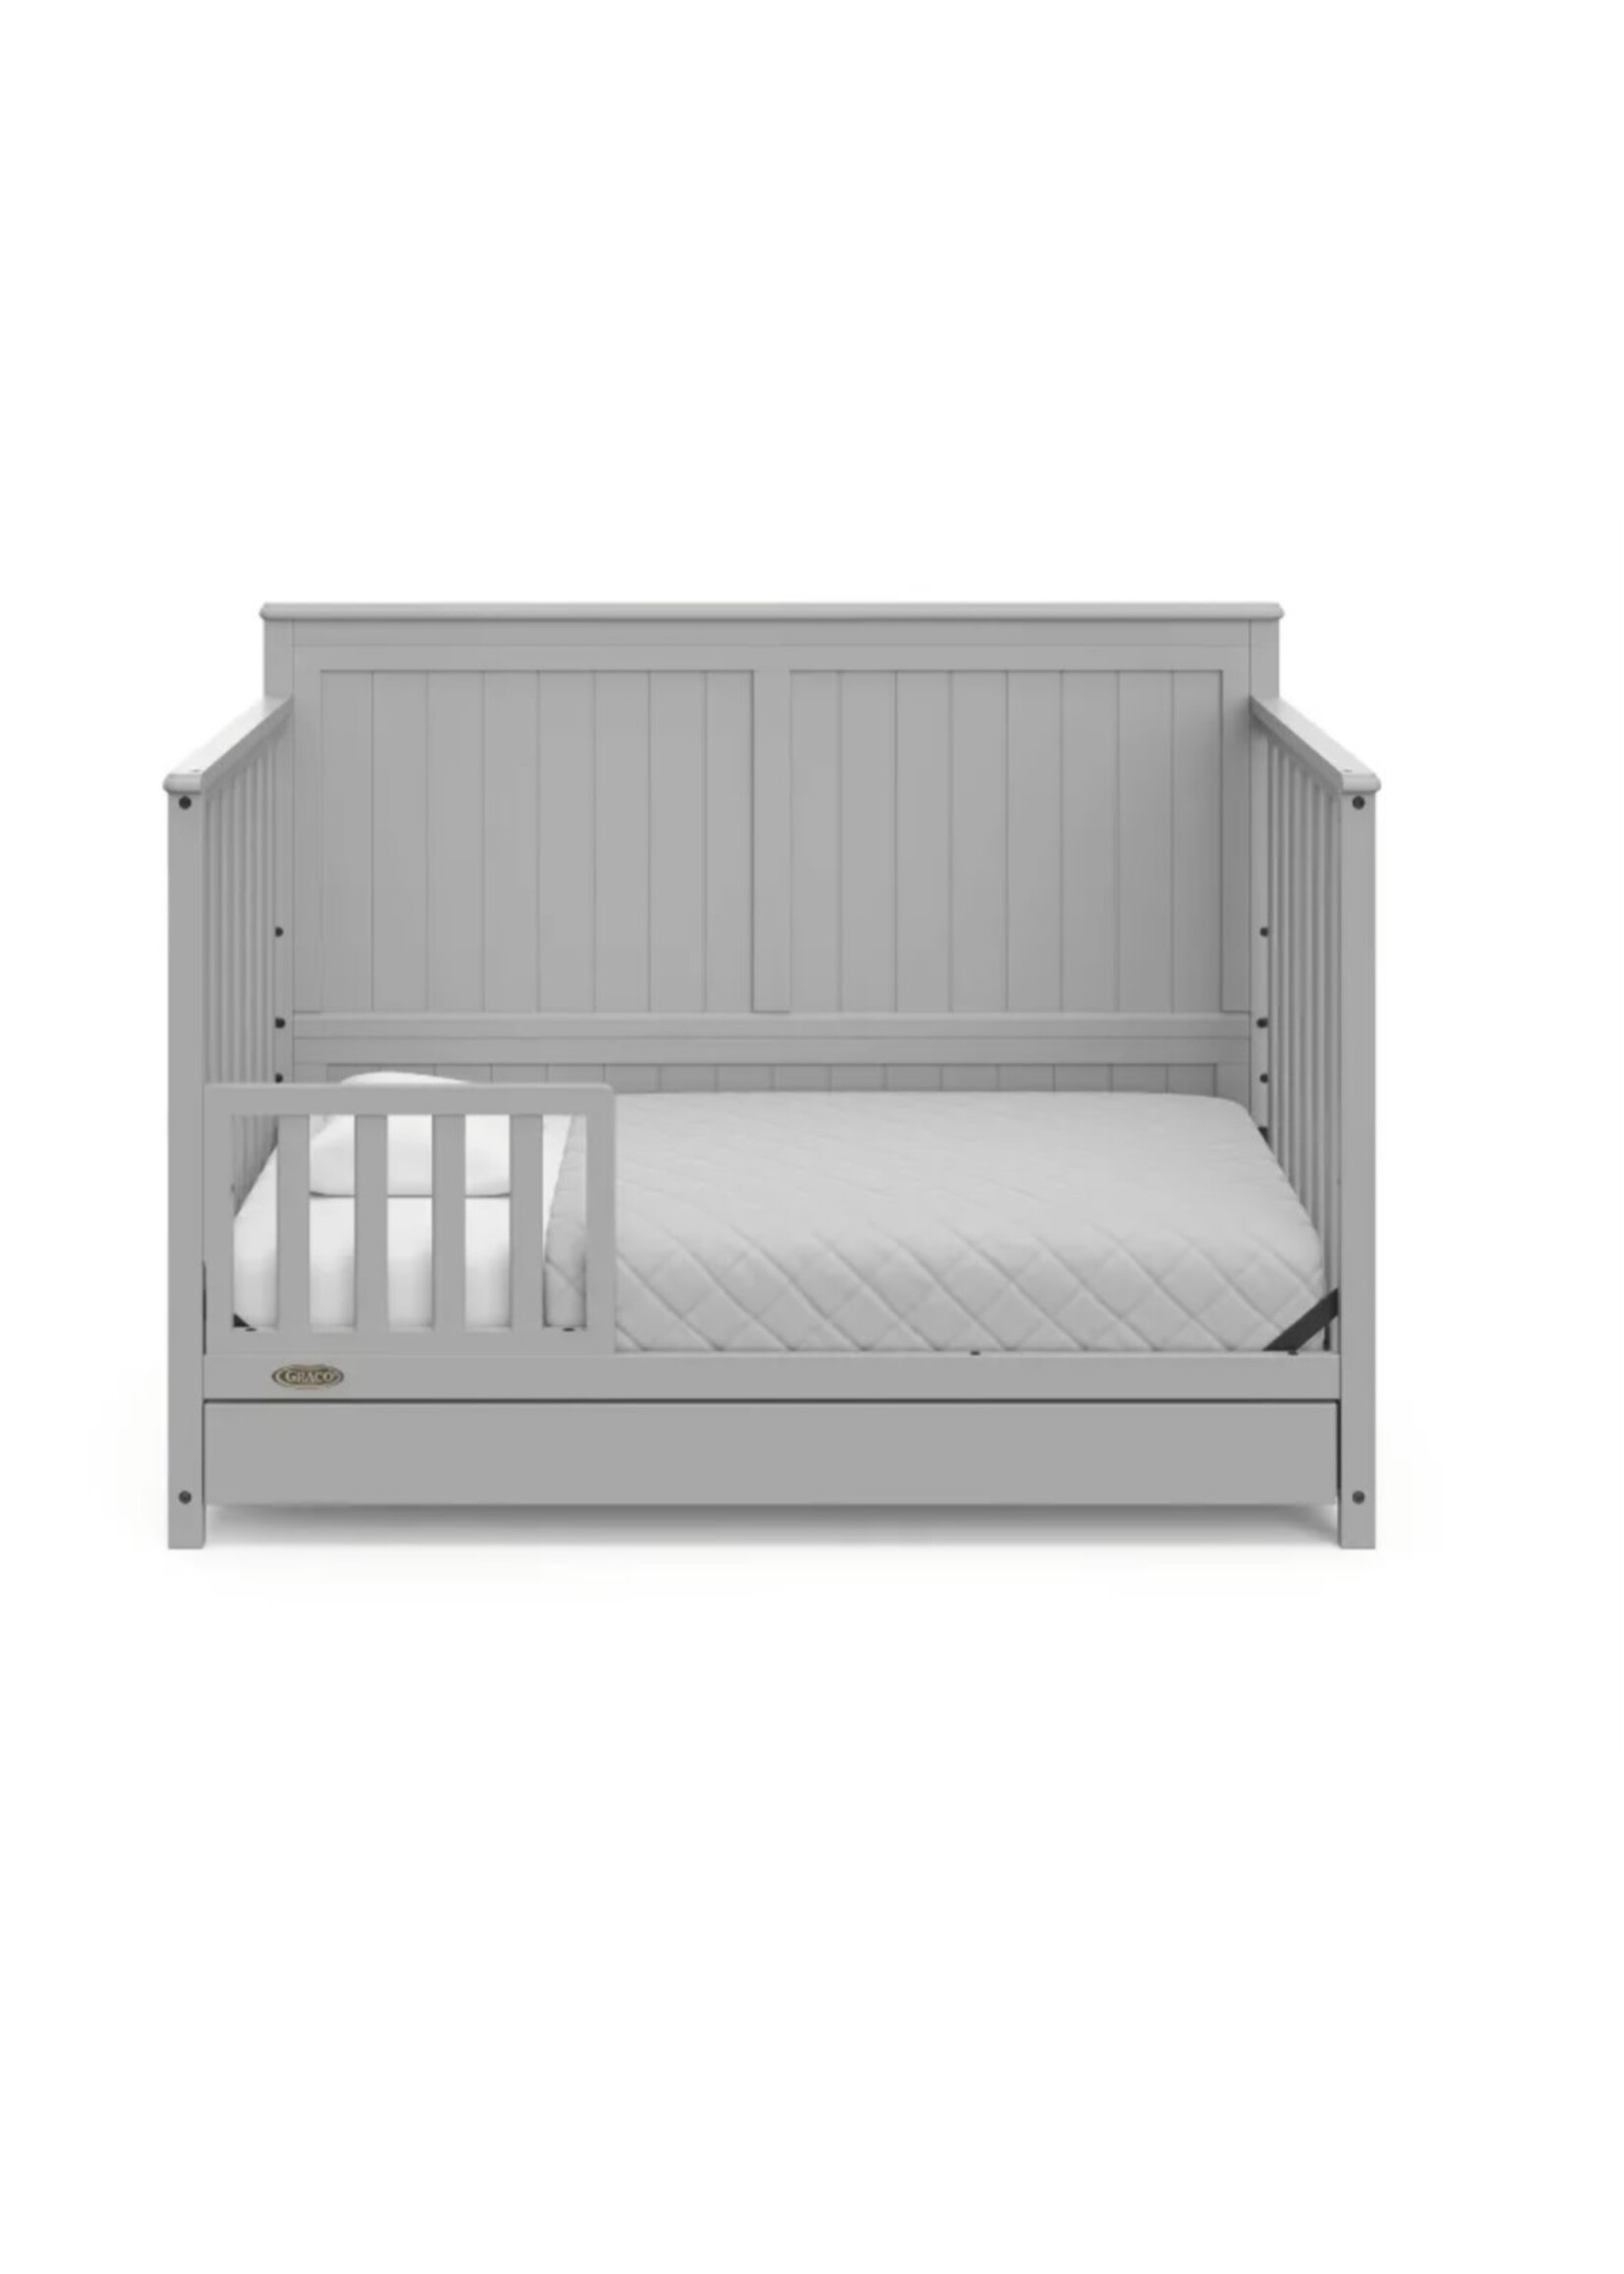 Graco Hadley 5-in-1 Convertible Crib with Drawer - Pebble Gray